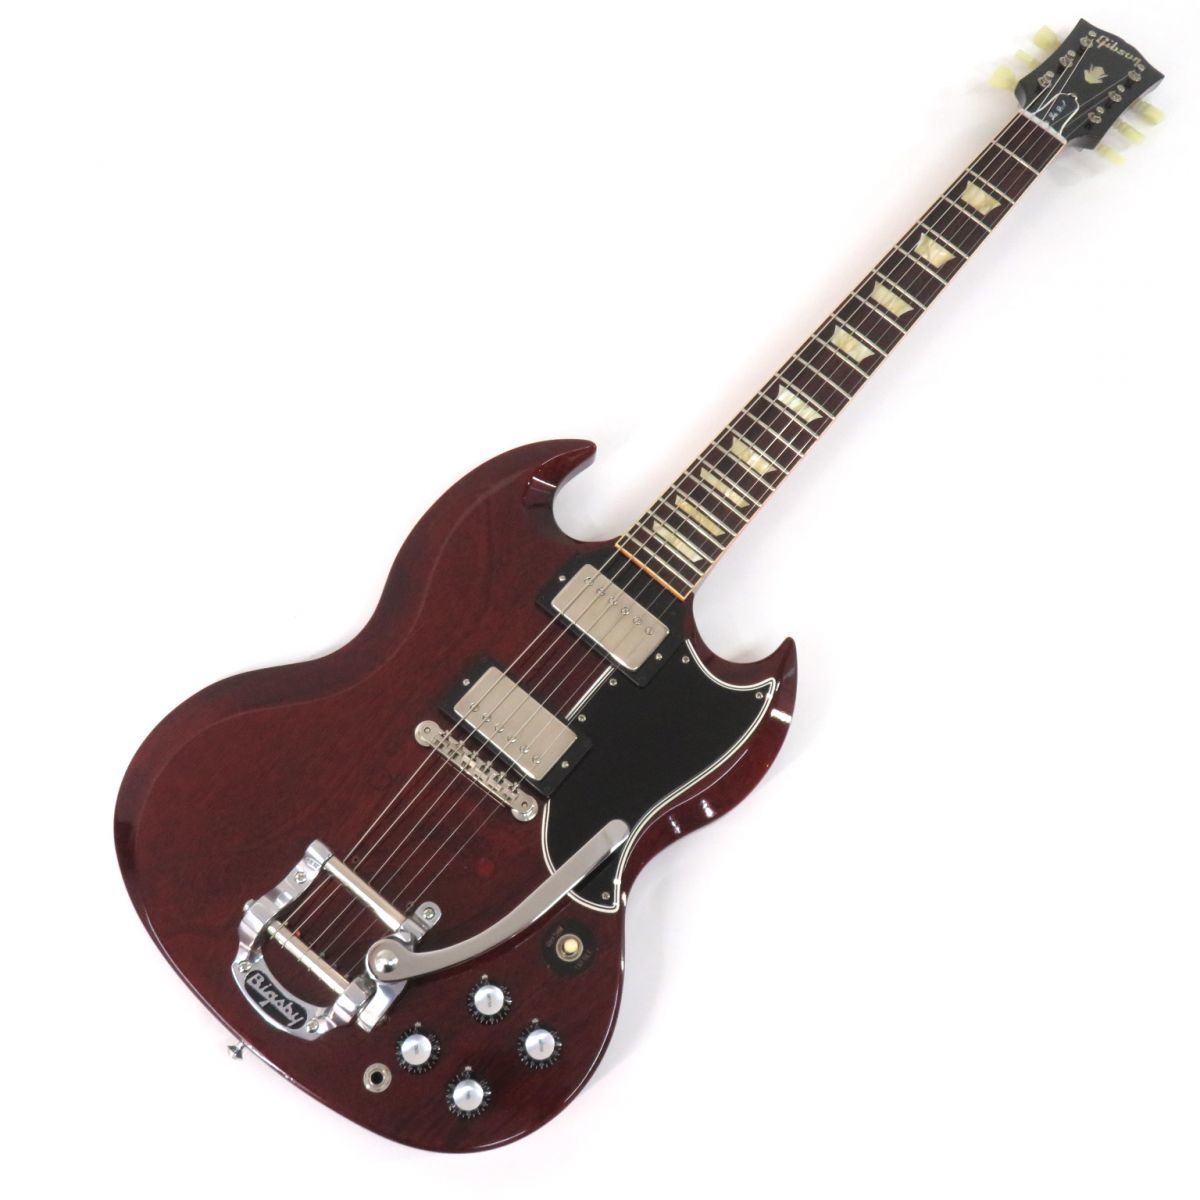 092s☆Gibson ギブソン Historic Collection 1961 SG Standard Reissue Mod チェリー 2000年製 エレキギター ※中古_画像1